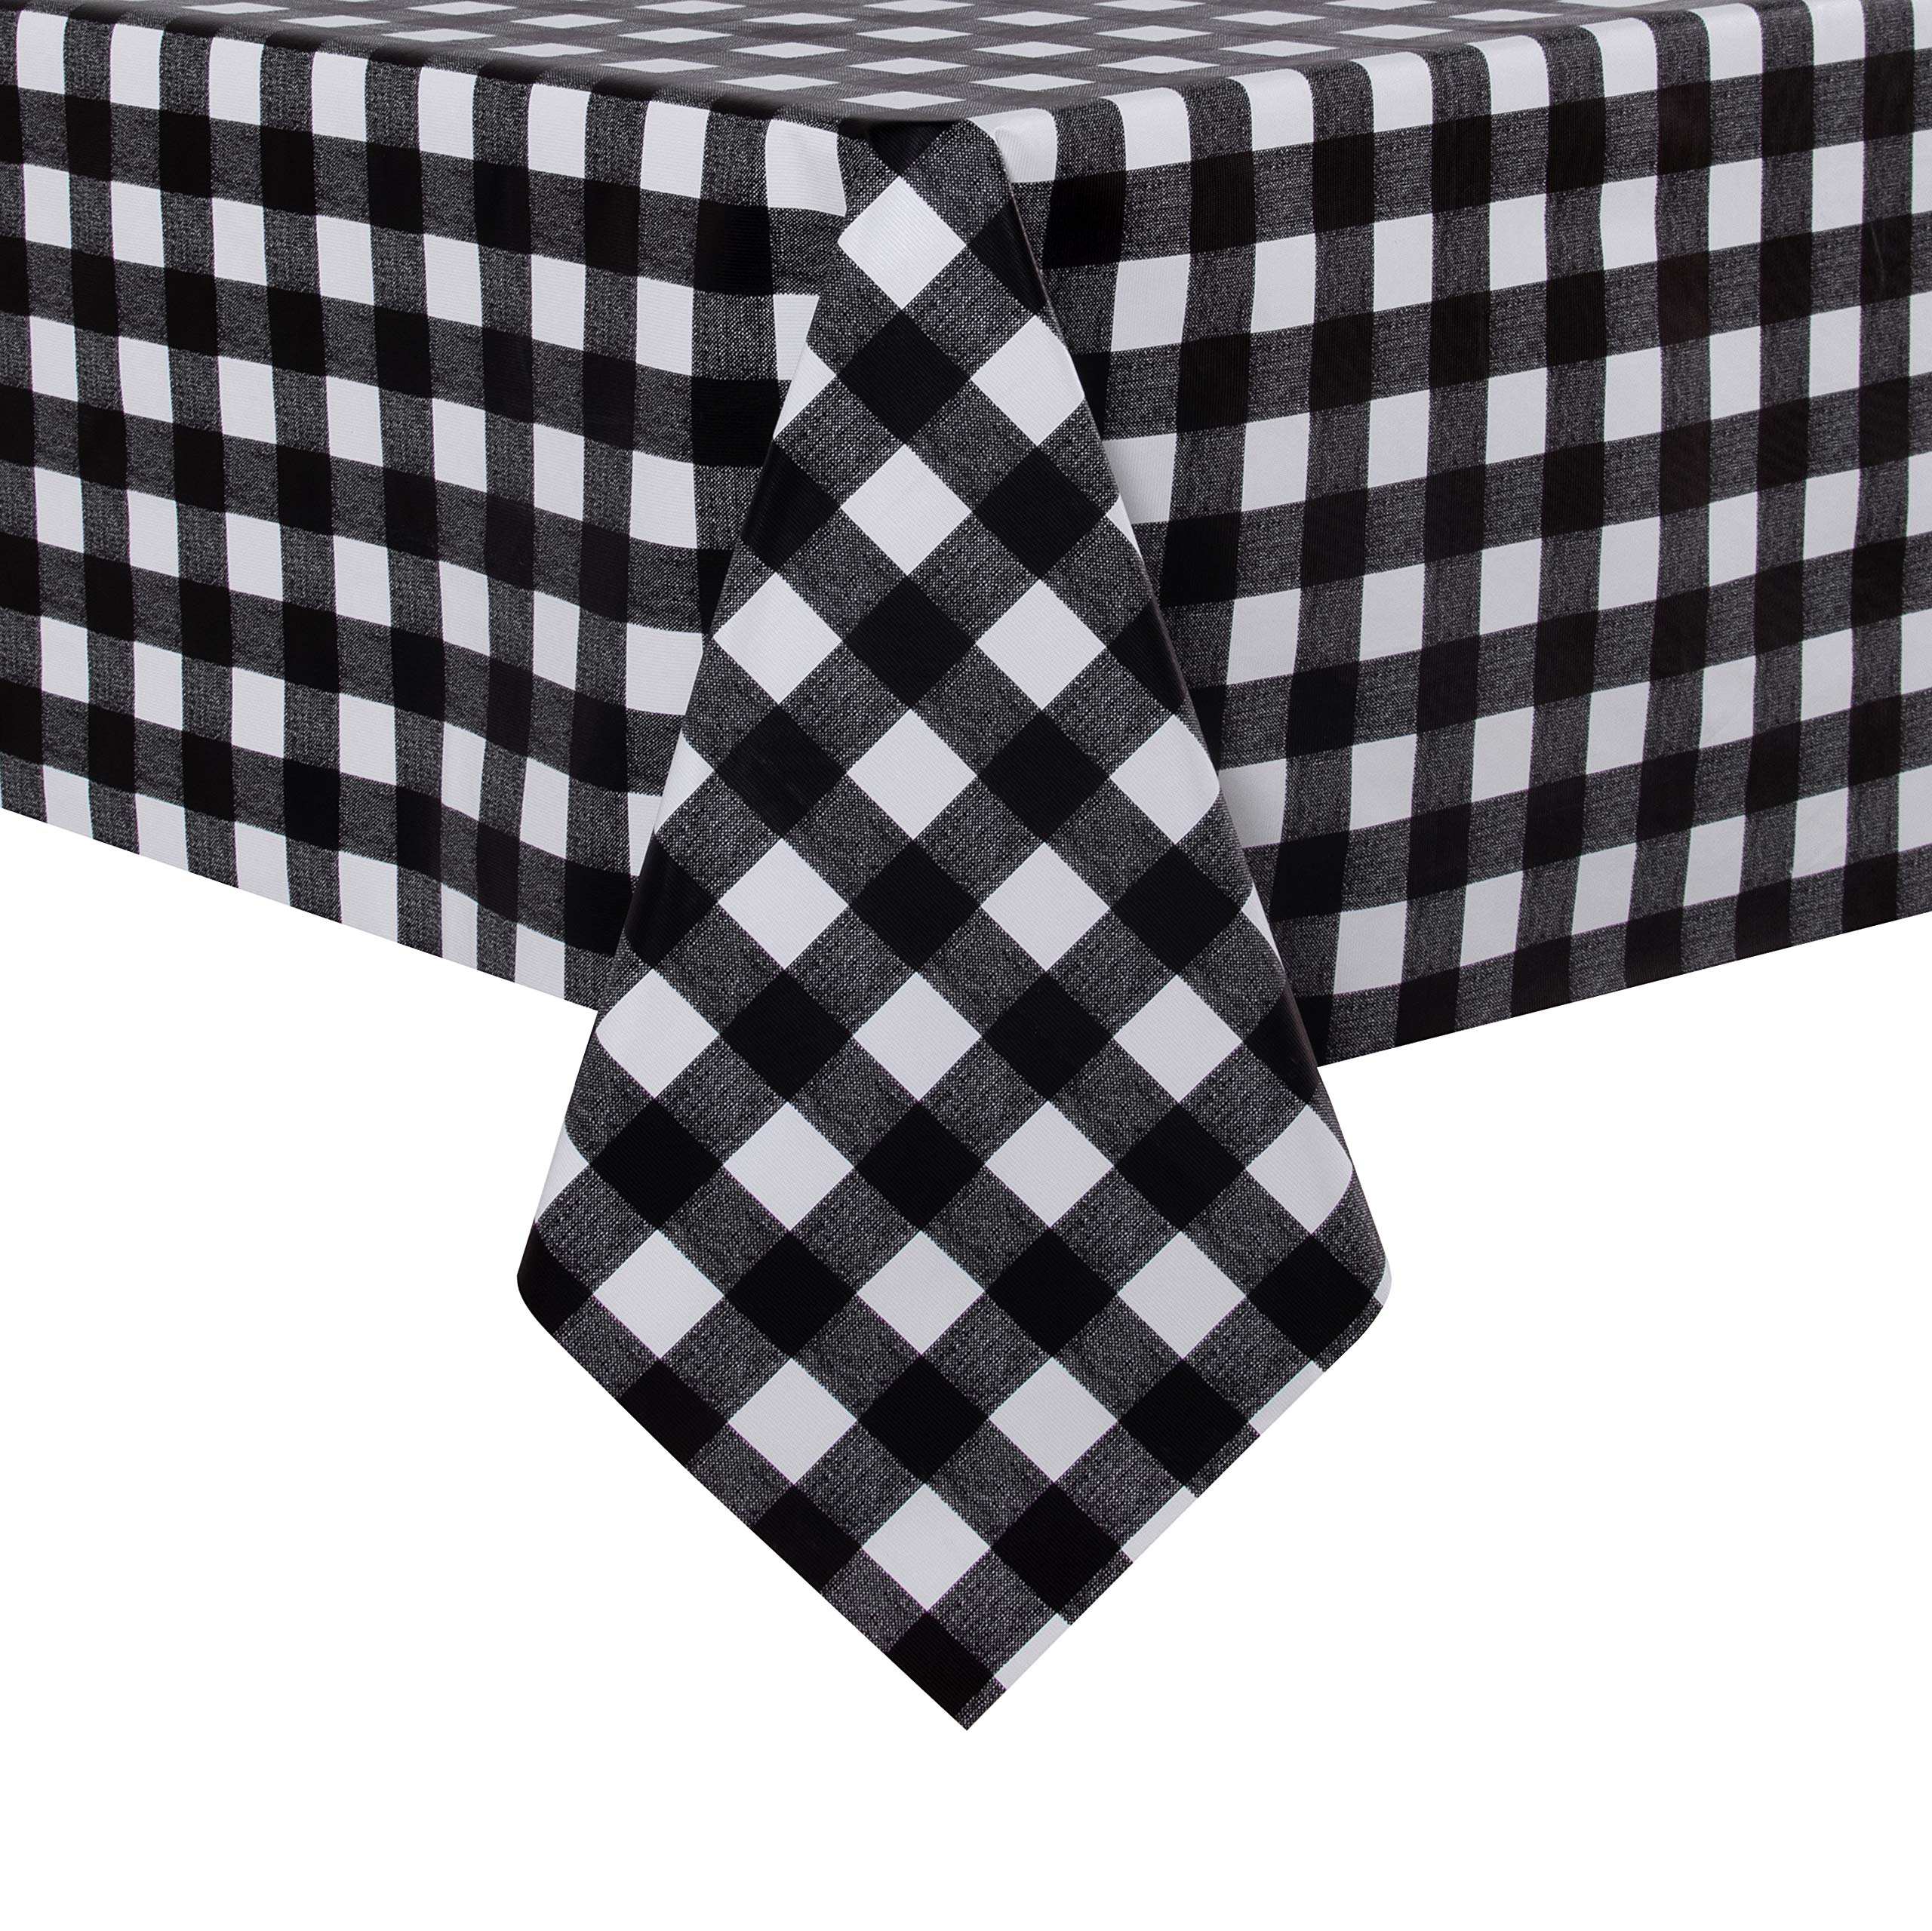 sancua Checkered Vinyl Square Tablecloth - 54 x 54 Inch - 100% Waterproof Oil Proof Spill Proof PVC Table Cloth, Wipe Clean Tabl